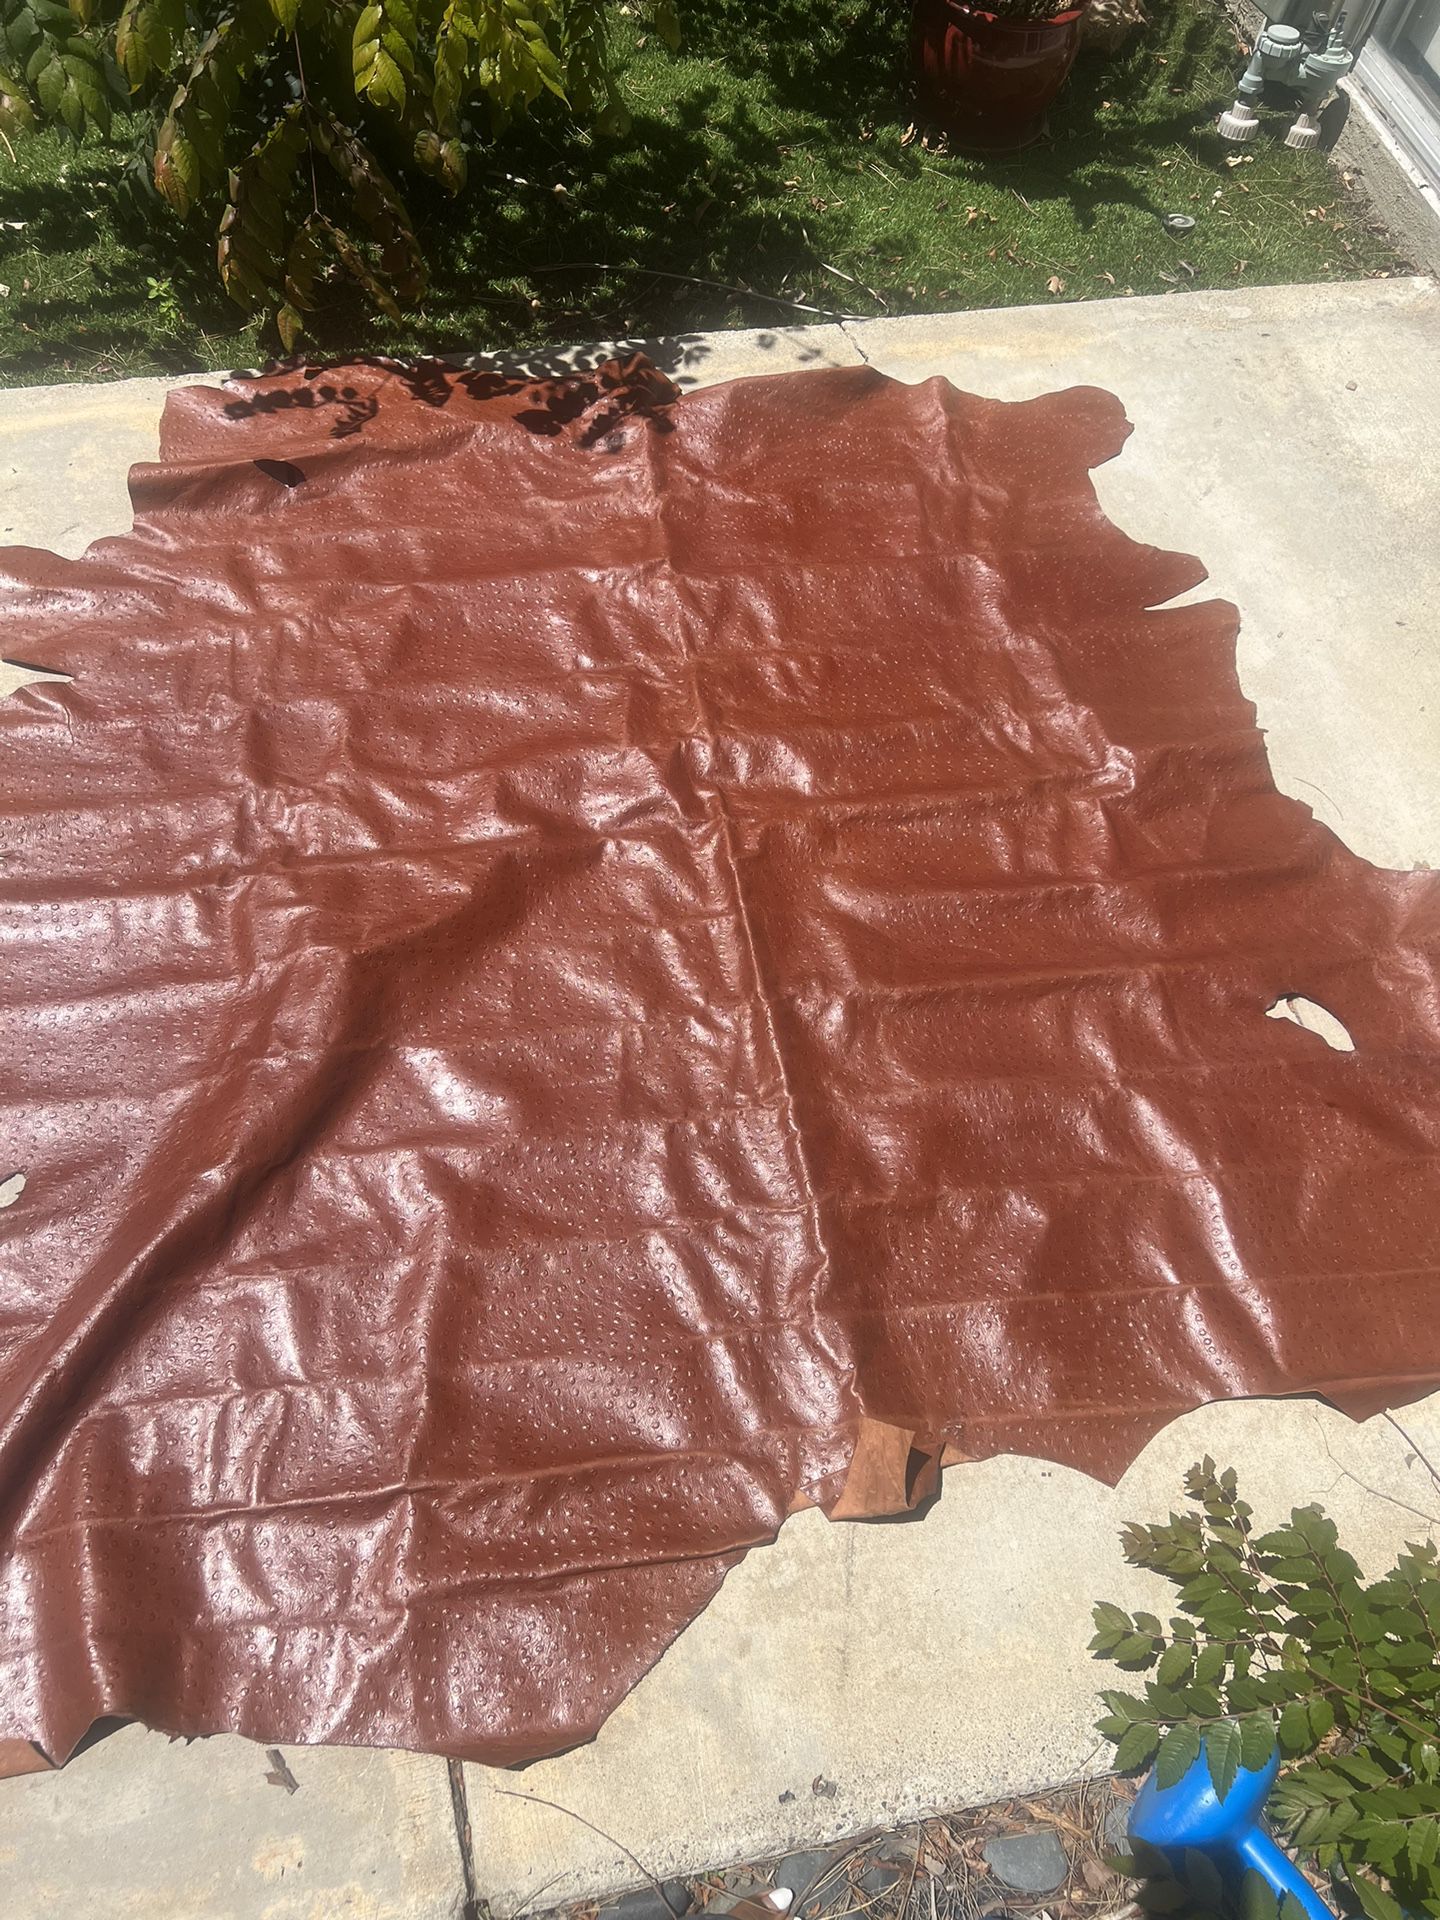 2 Large Ostrich leather hide Genuine ostrich leather Tanned skin